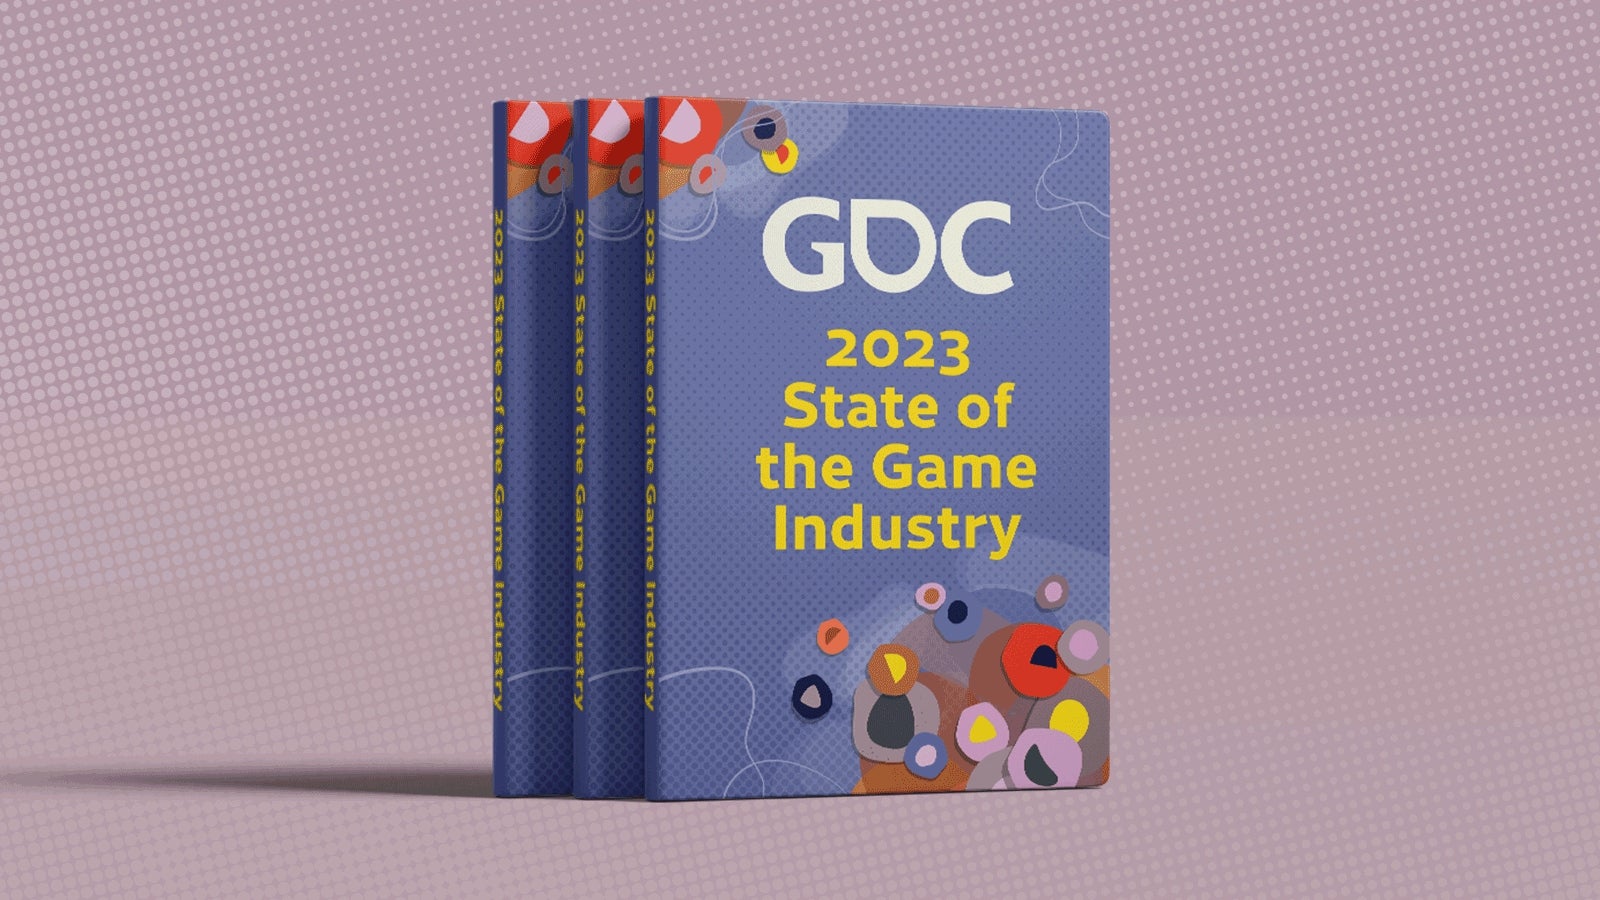 A photo of hard copies of the GDC State Of The Industry 2023 survey